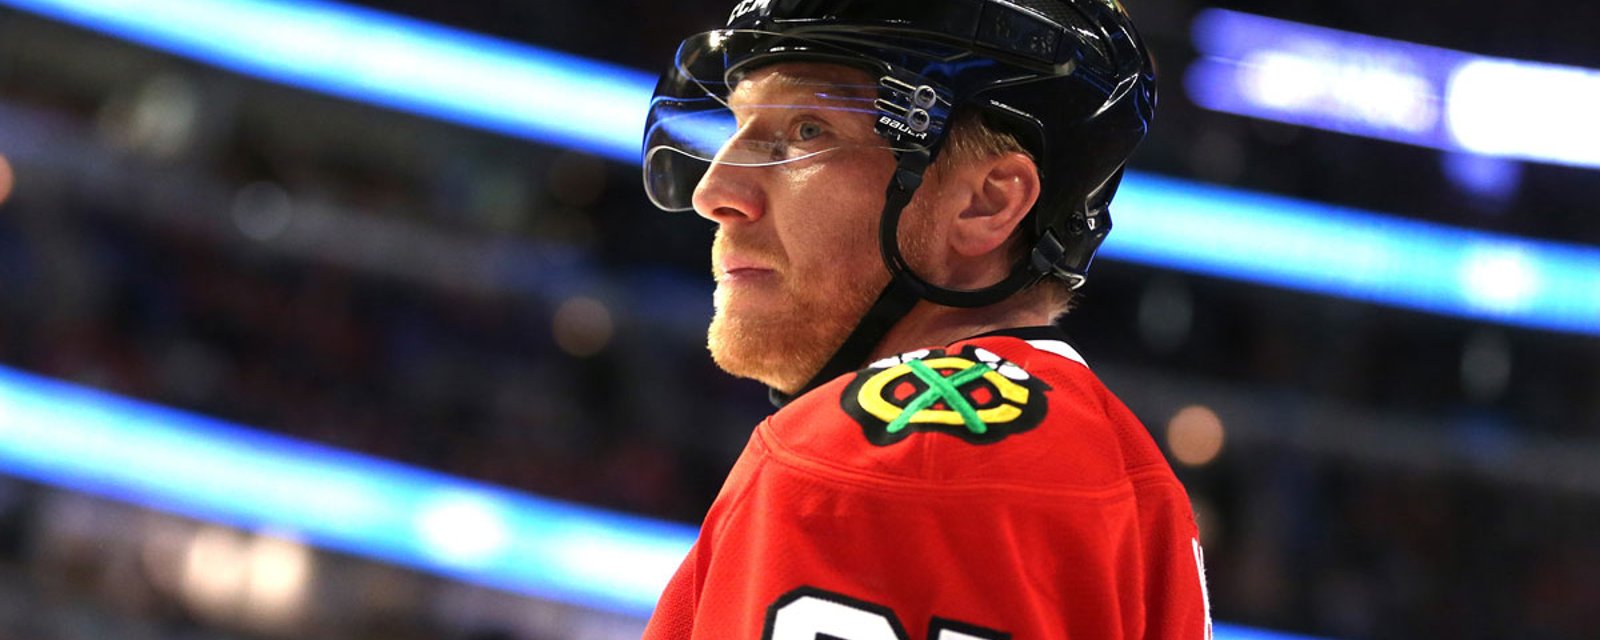 Hawks allowed to place Marian Hossa on long-term injured reserve